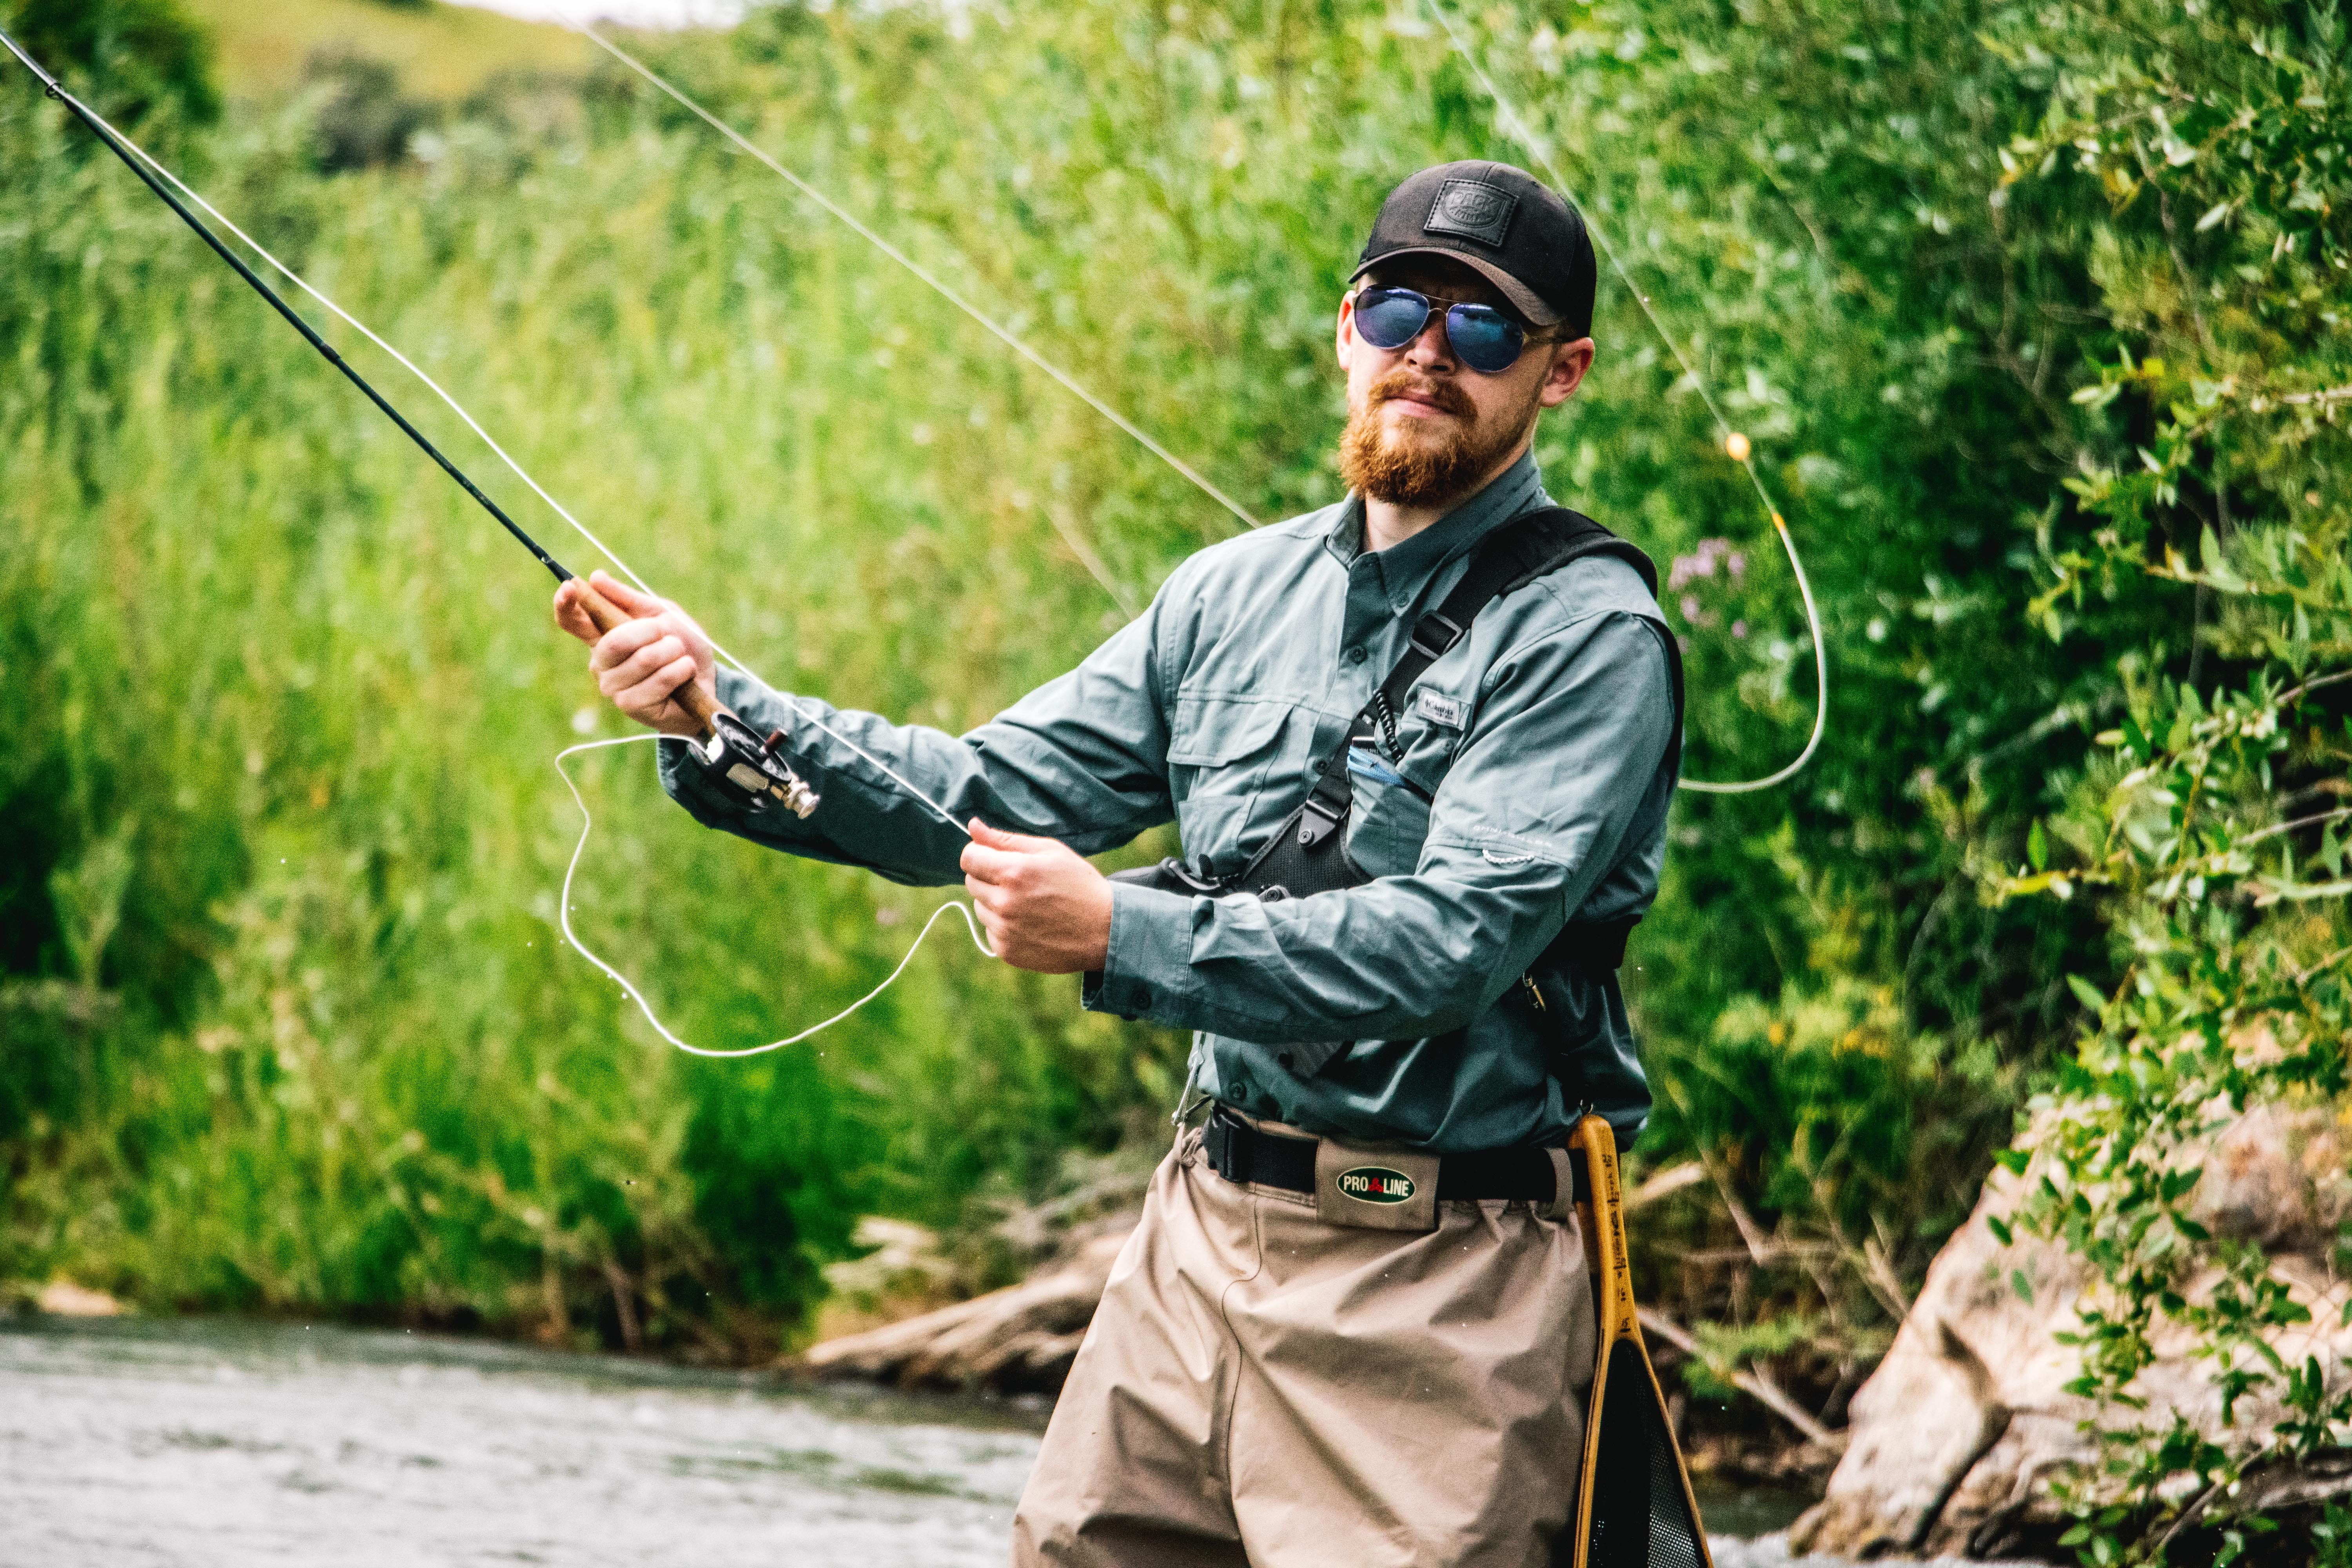 ON THE FLY: Fishing with a firearm